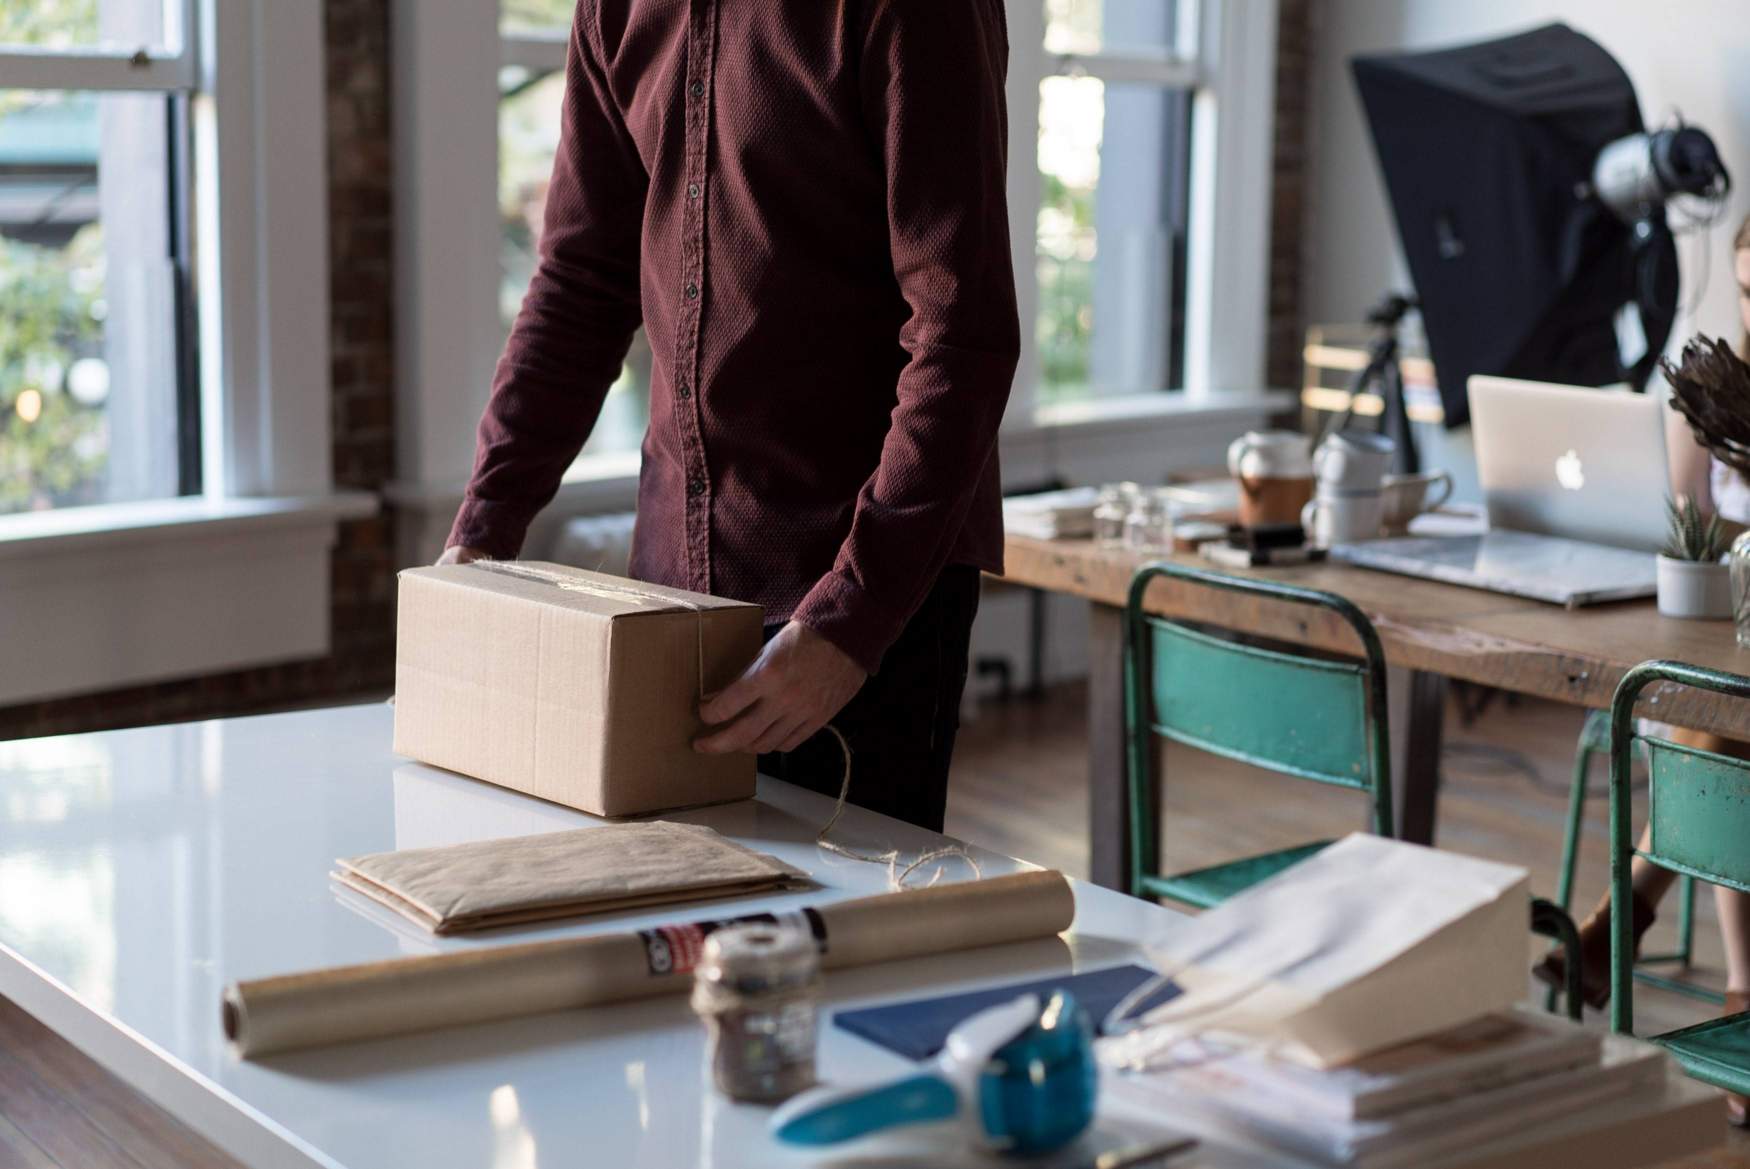 man in maroon shirt, packing box on office table